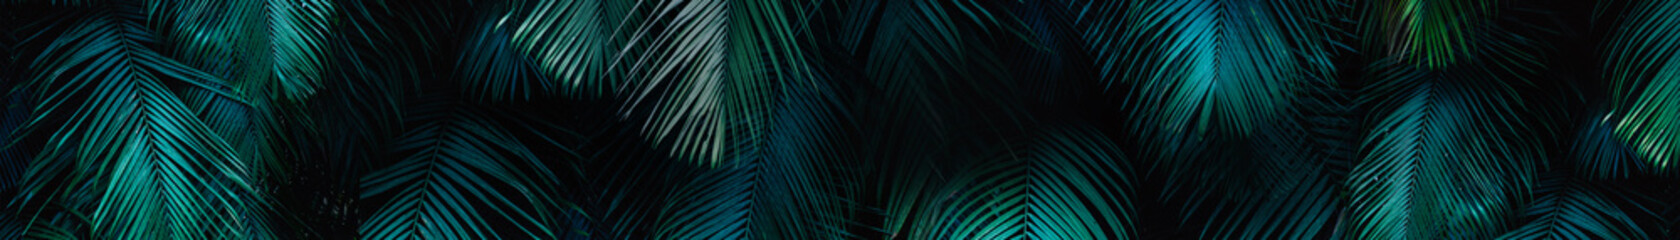 Web sized banner of tropical jungle style palm leaves